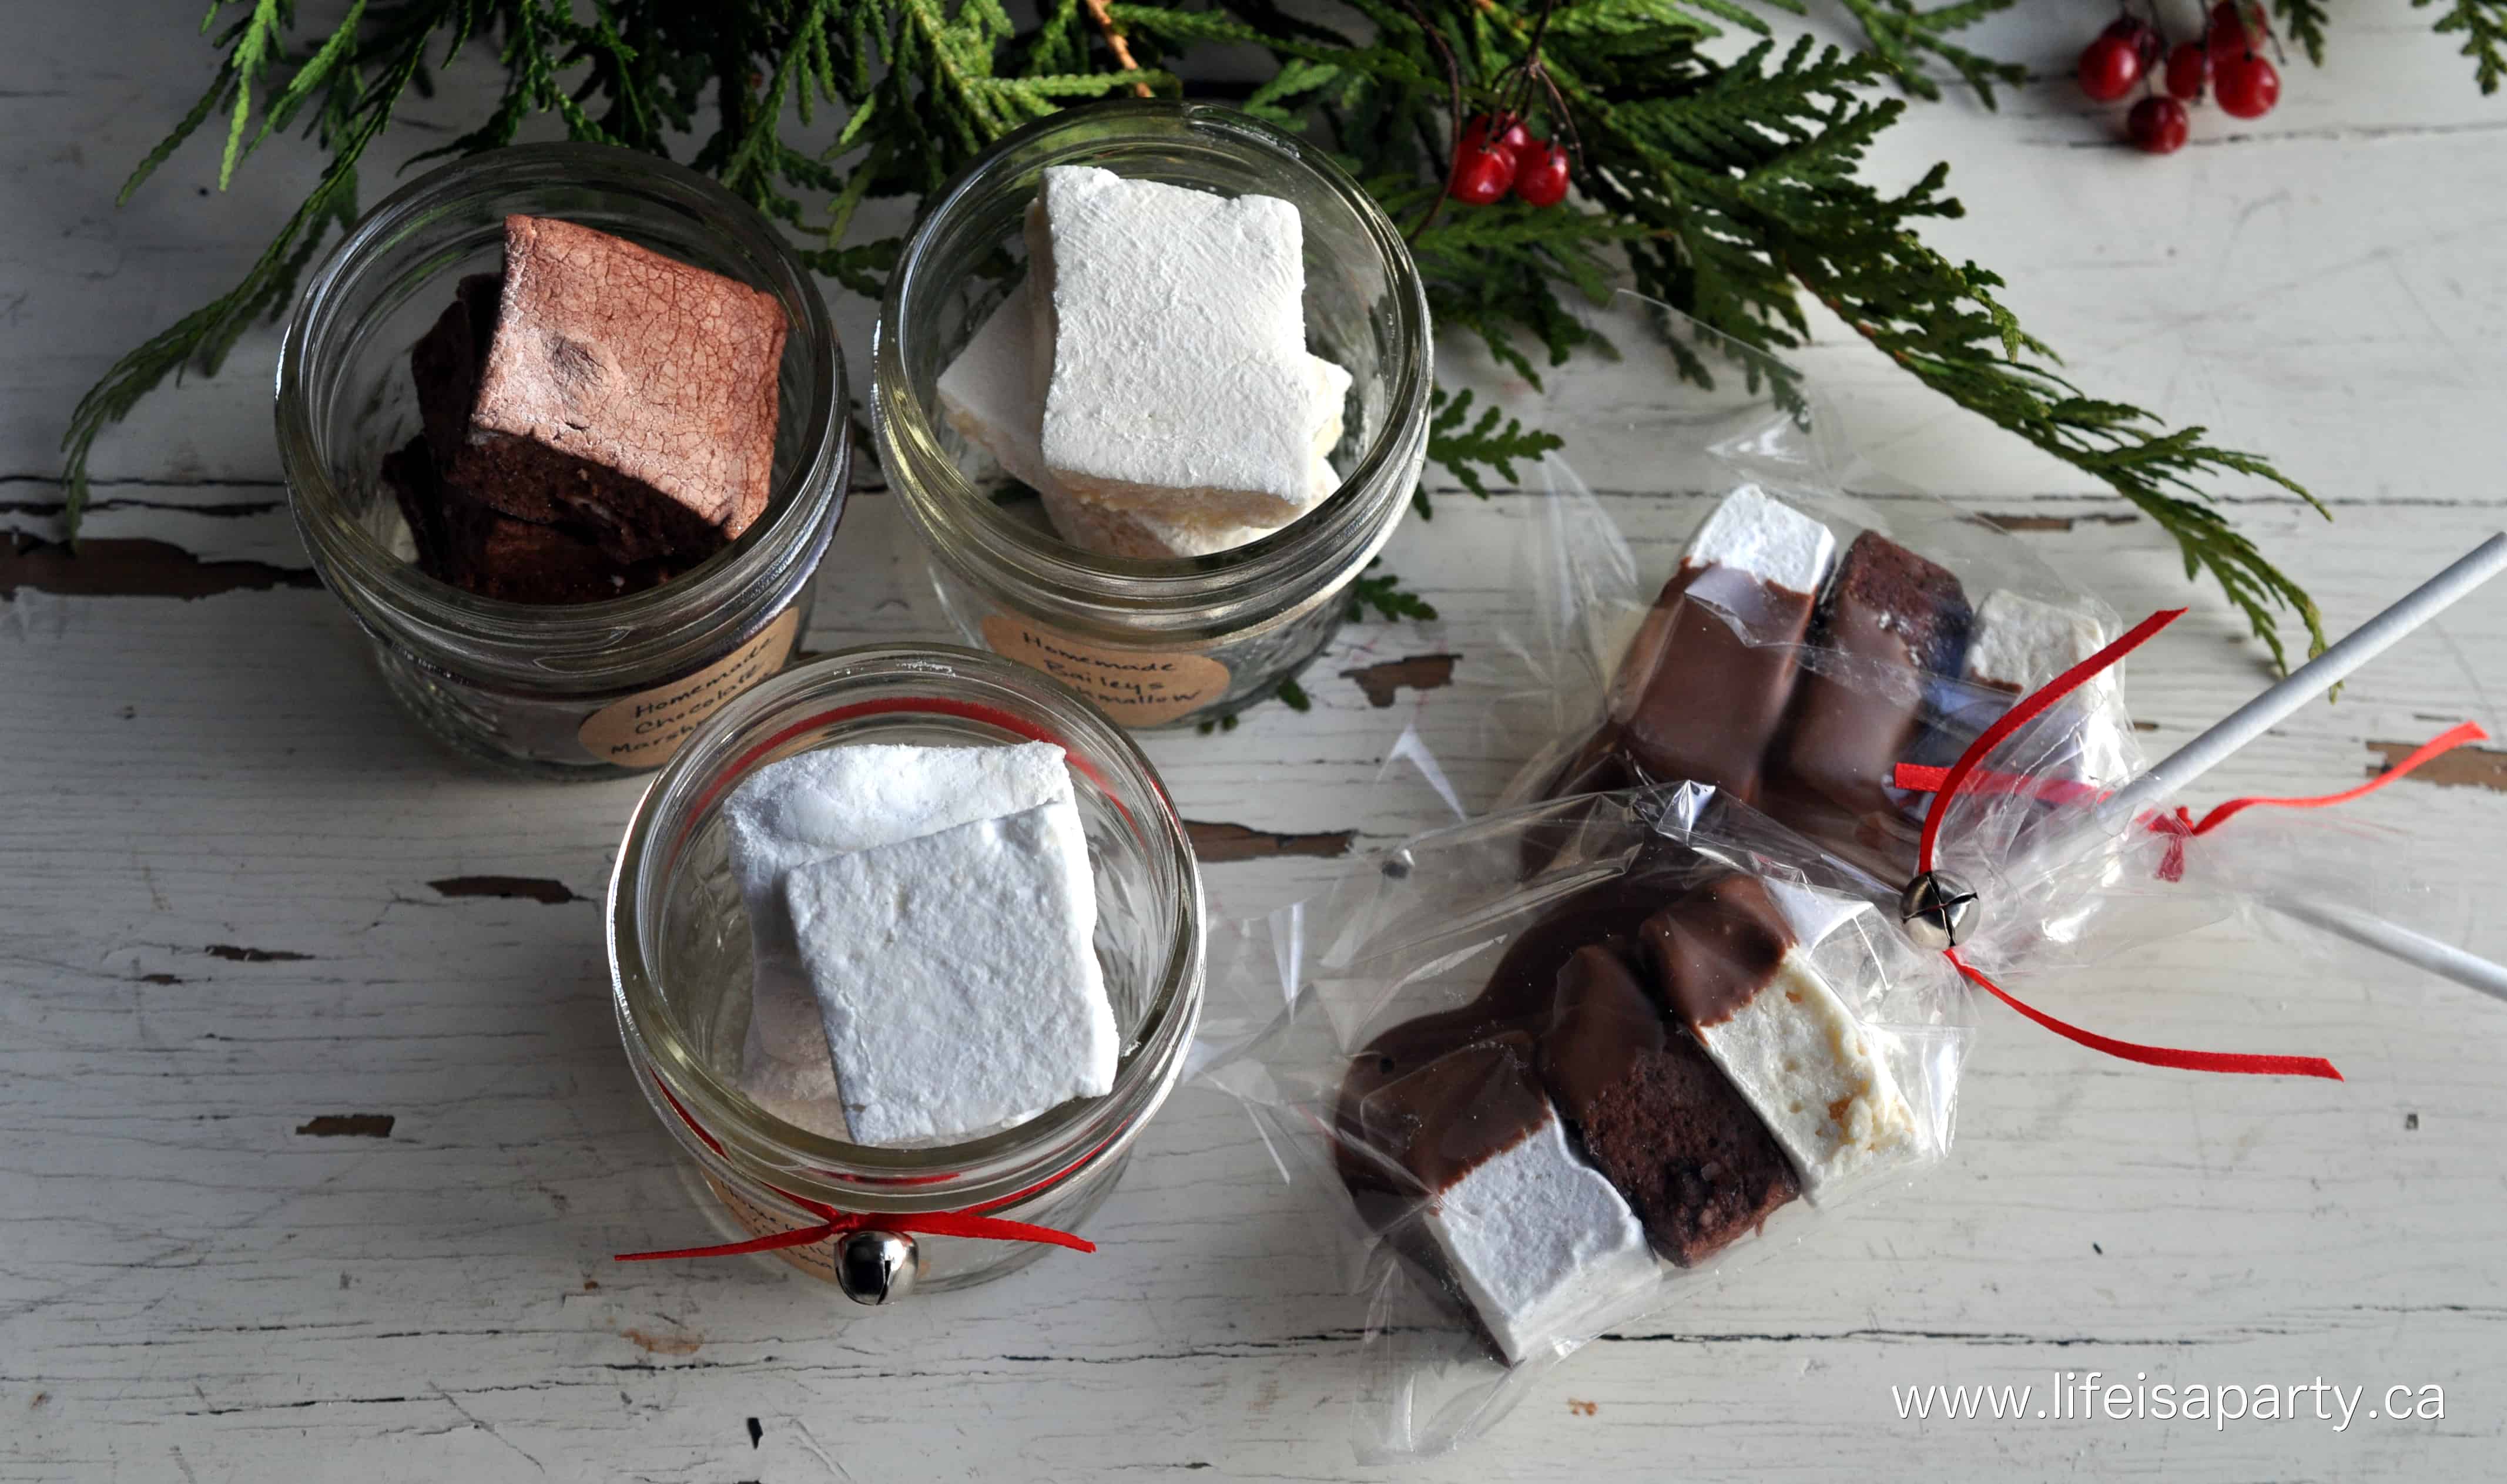 Homemade Flavoured Marshmallows -Bailey's, Chocolate, and Vanilla -how to make your own flavoured marshmallows, perfect for Christmas and gift giving!